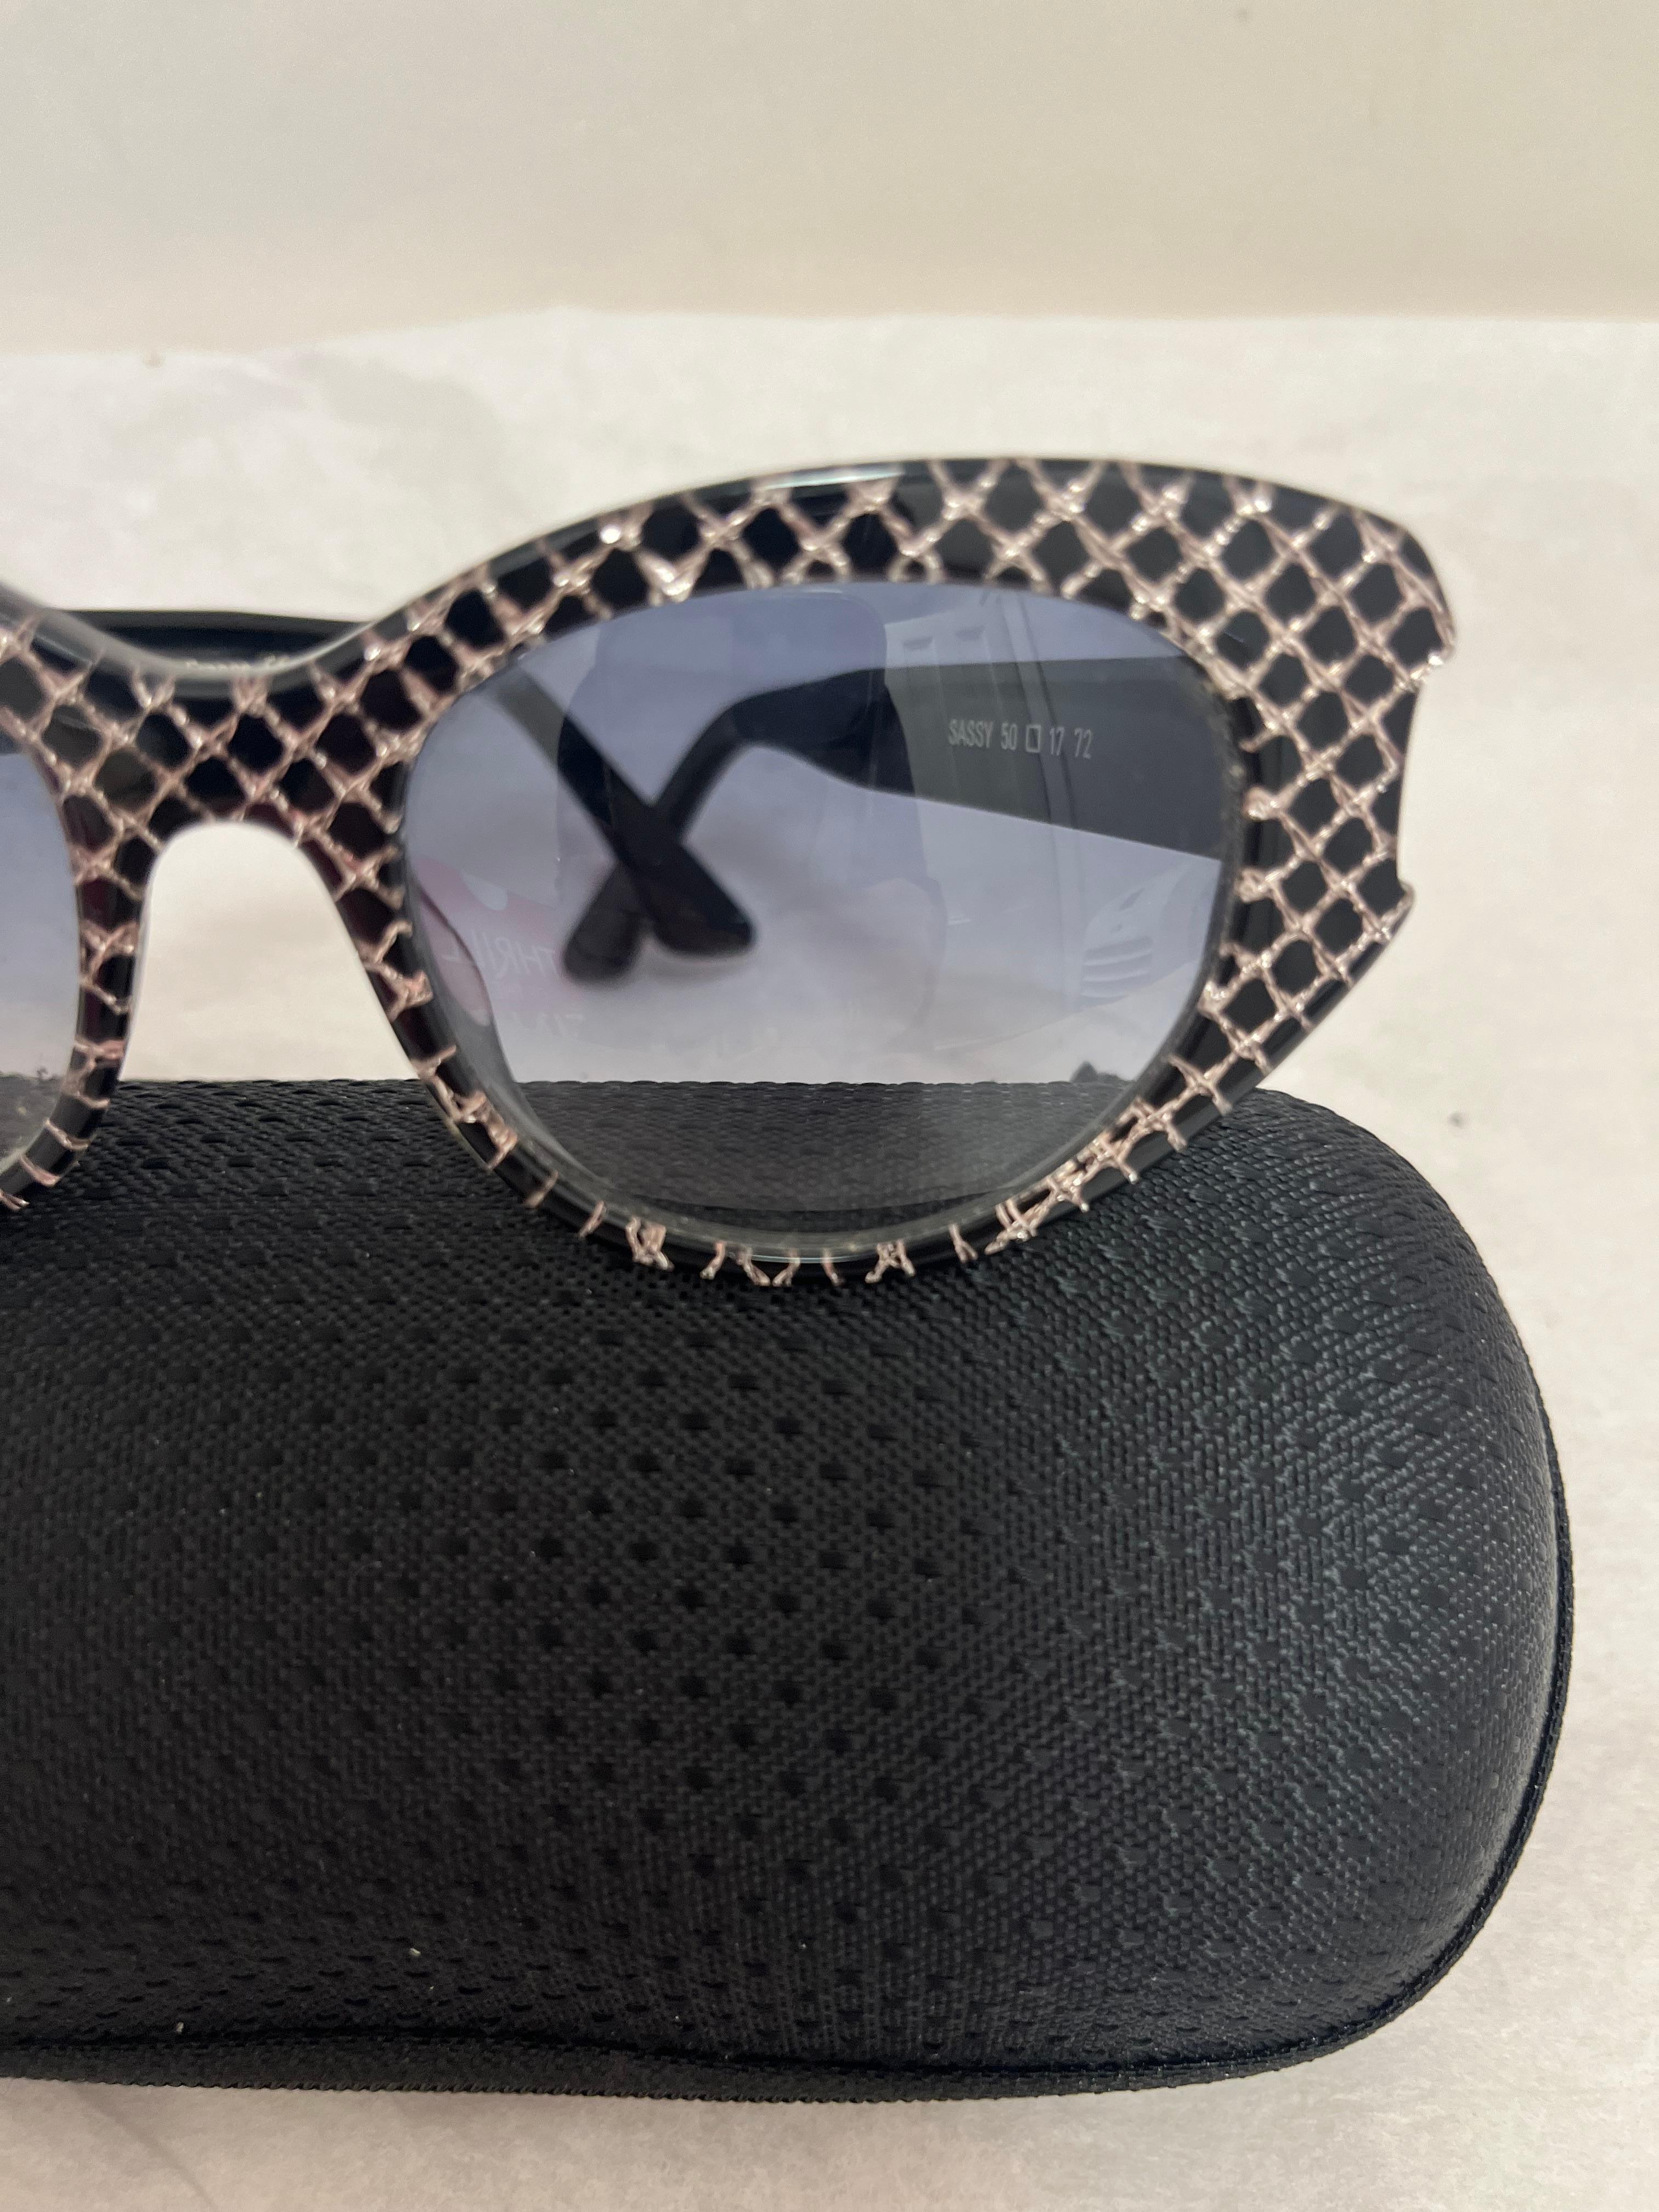 These are vintage Thierry Lasry Sunglasses handmade in France. These sunglasses are in unworn condition with gradient lenses. 
The model is Sassy 50, and the color is black with a diamond shaped pattern.